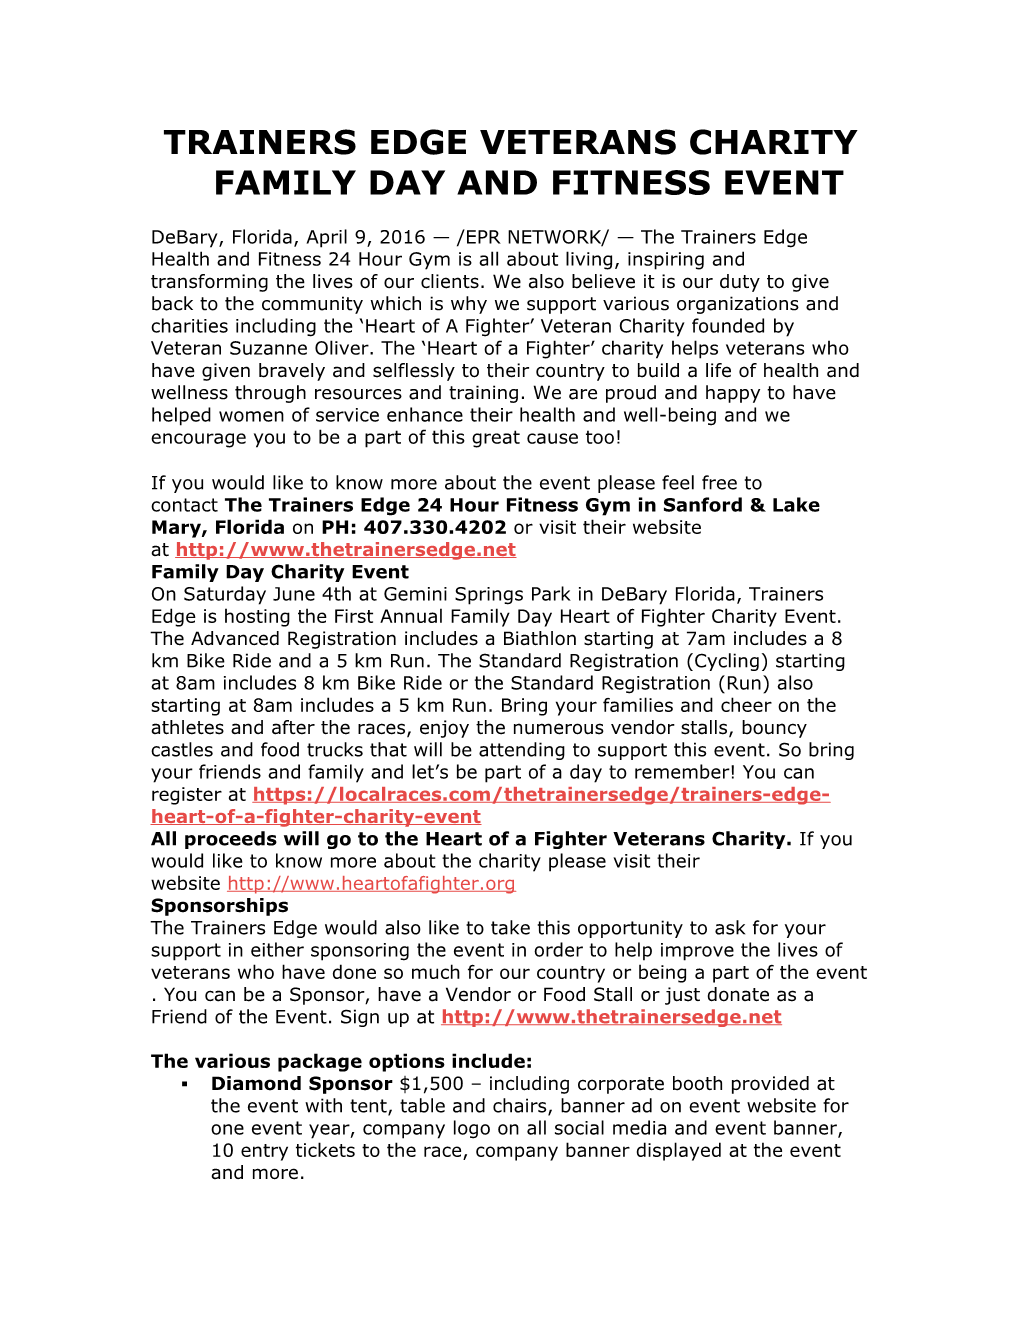 Trainers Edge Veterans Charity Family Day and Fitness Event